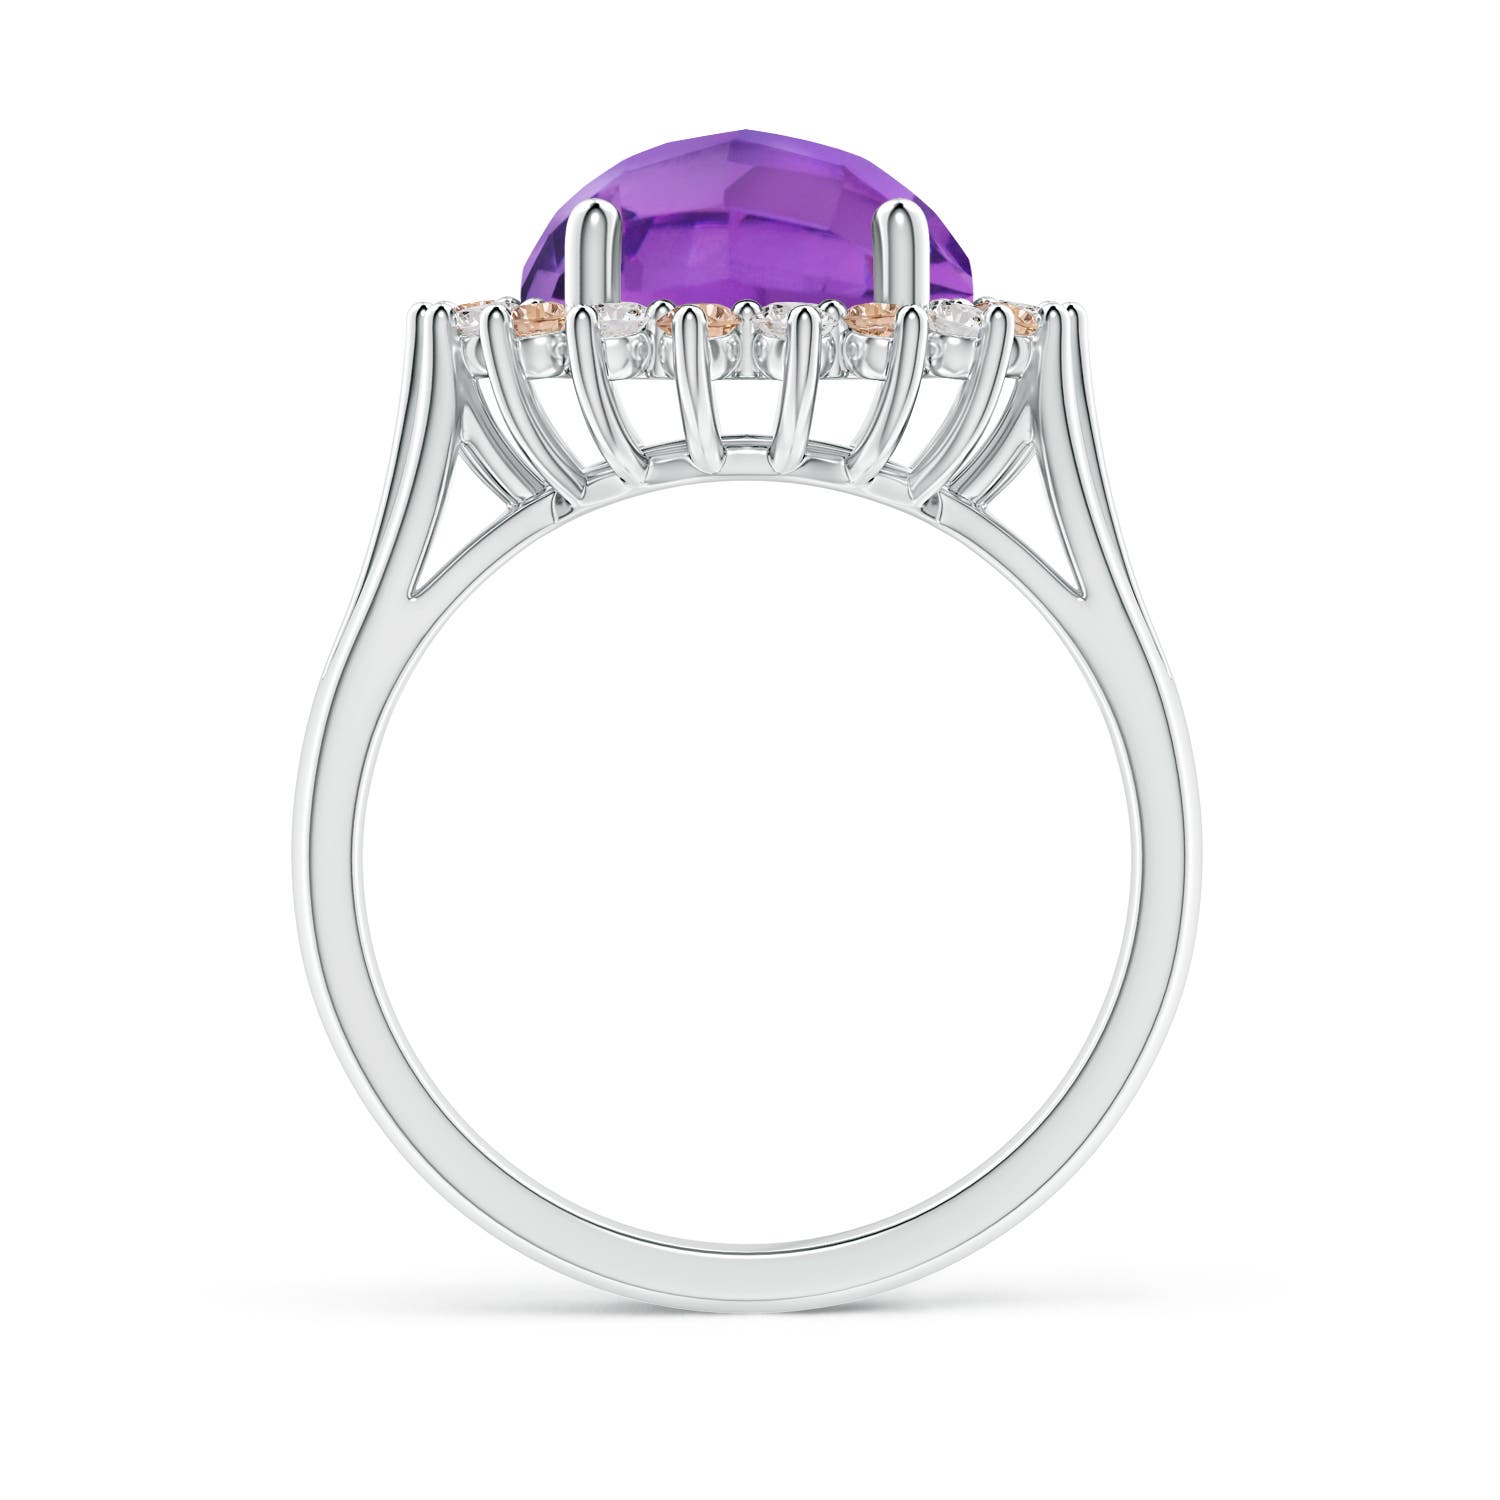 AA - Amethyst / 4.17 CT / 14 KT White Gold